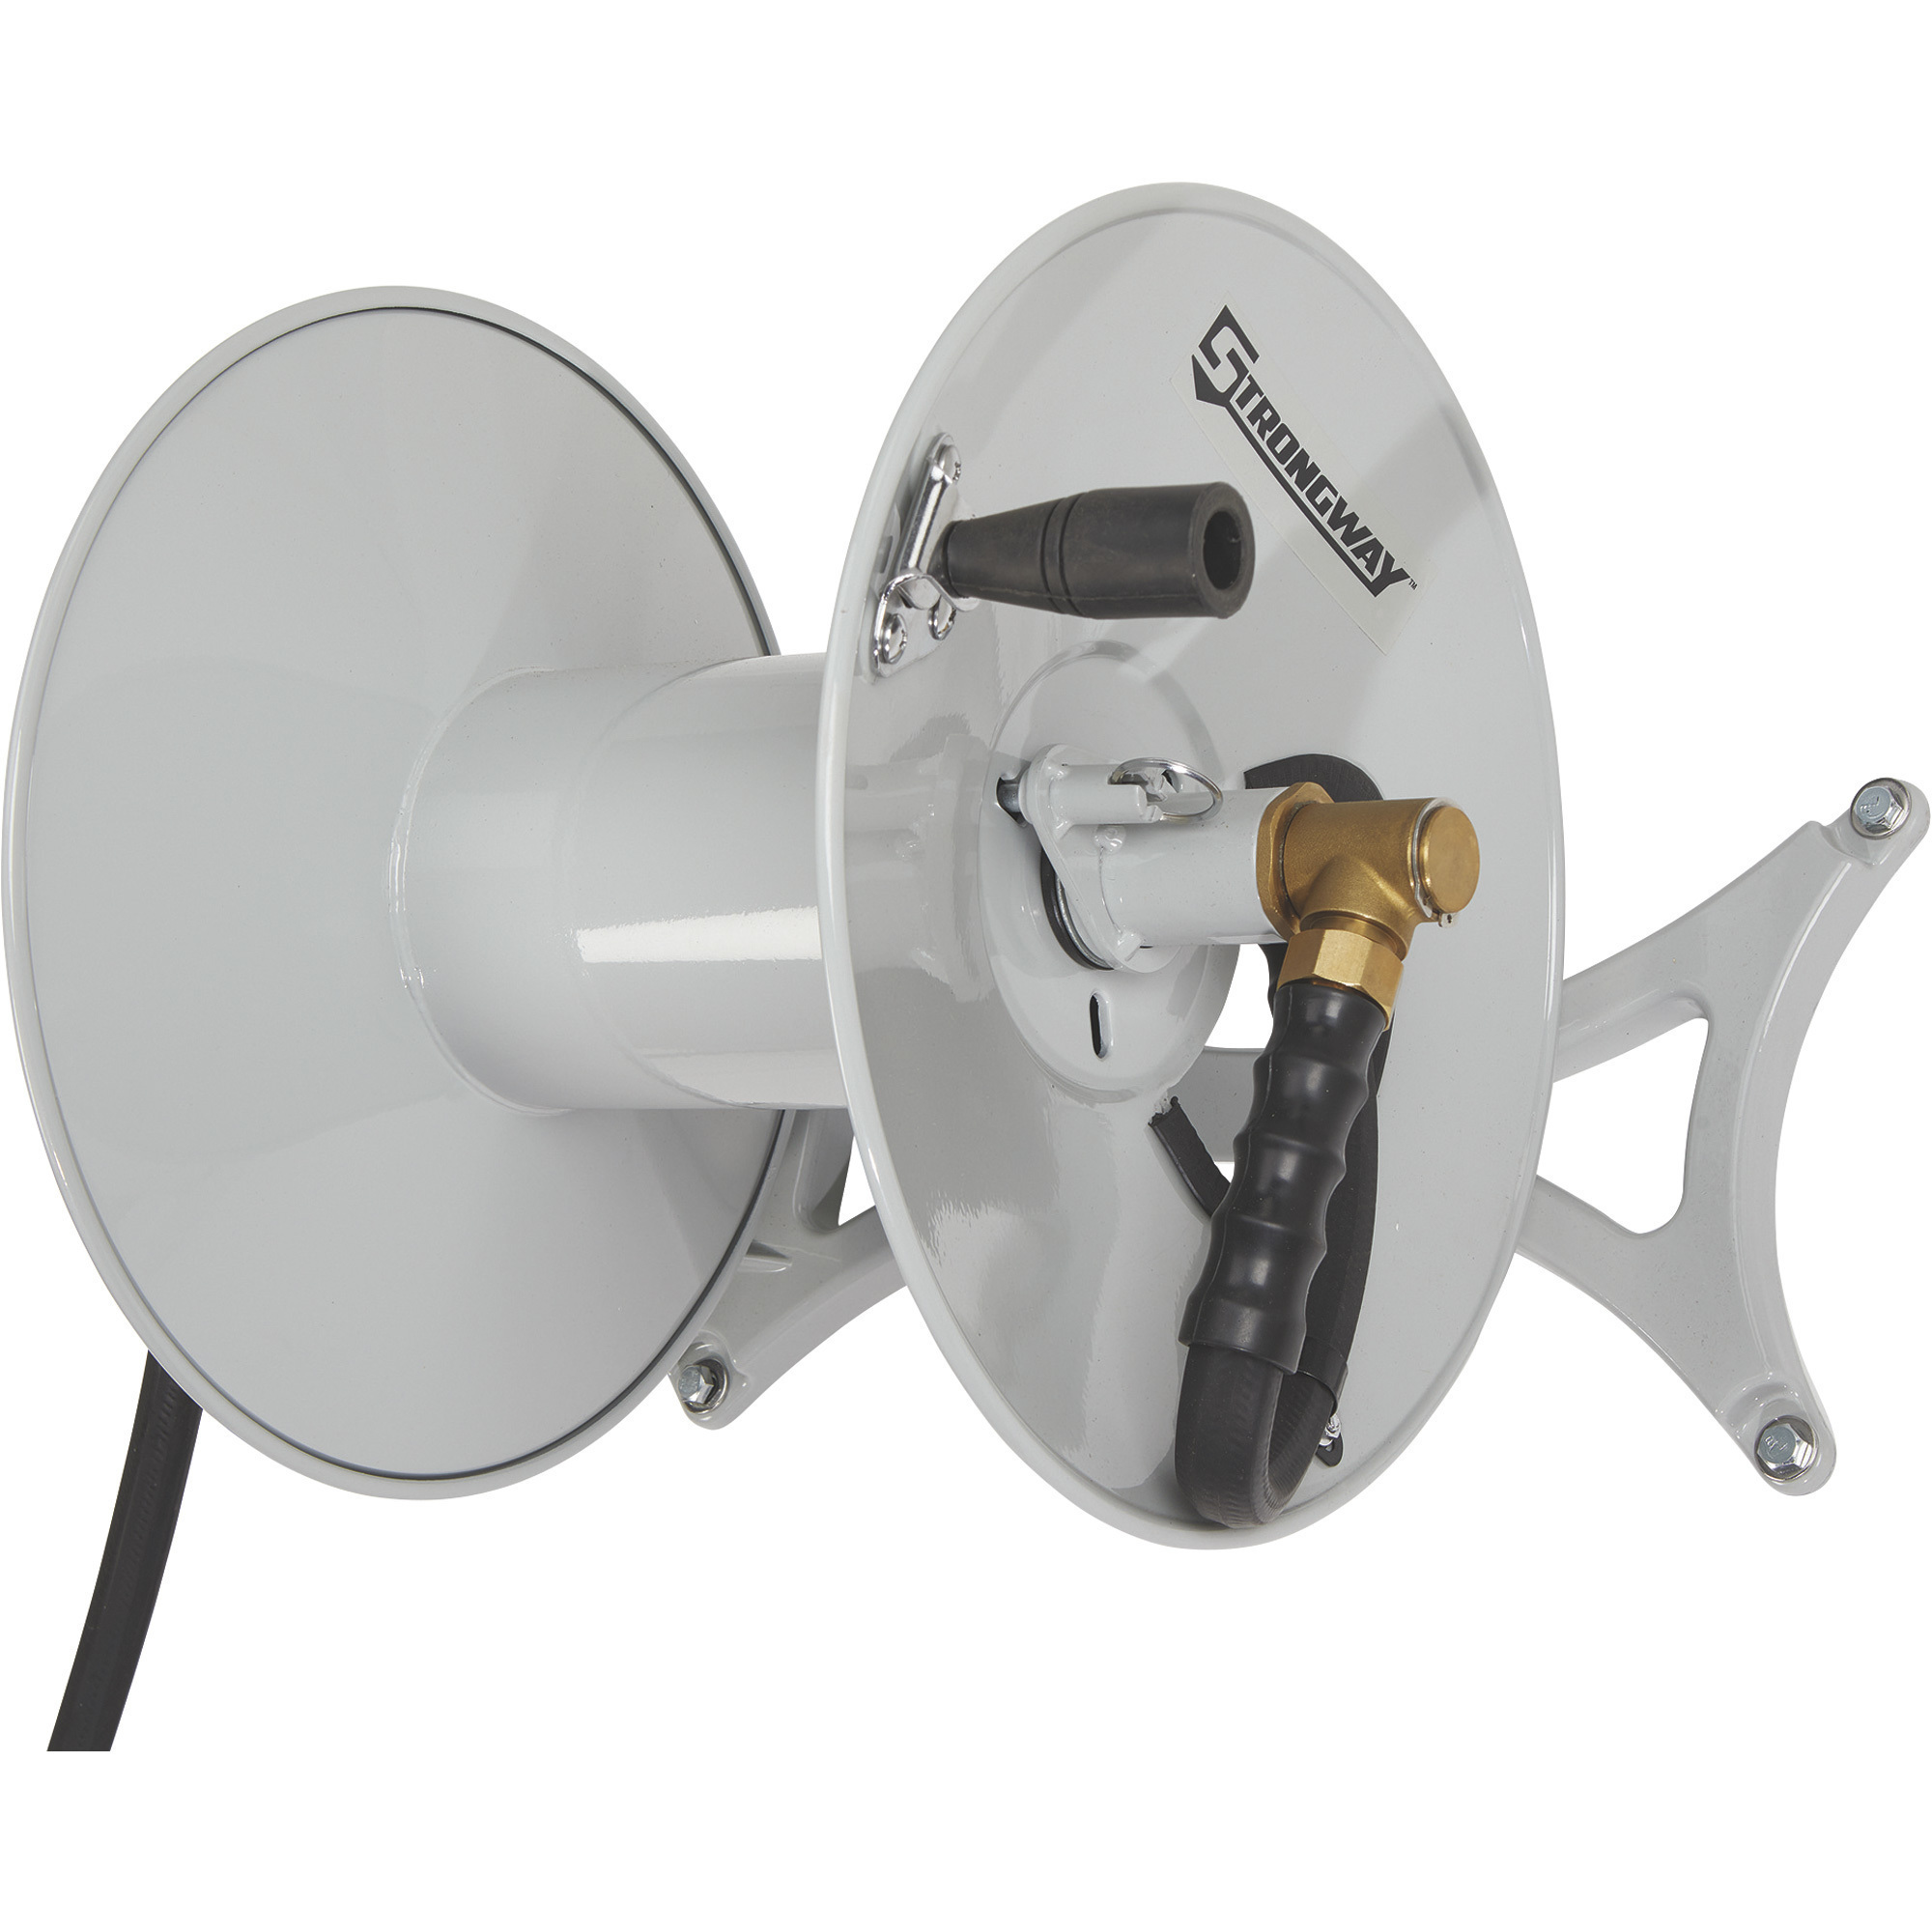 Wood's Cord Reel with Metal Stand Black • Prices », metal extension ...